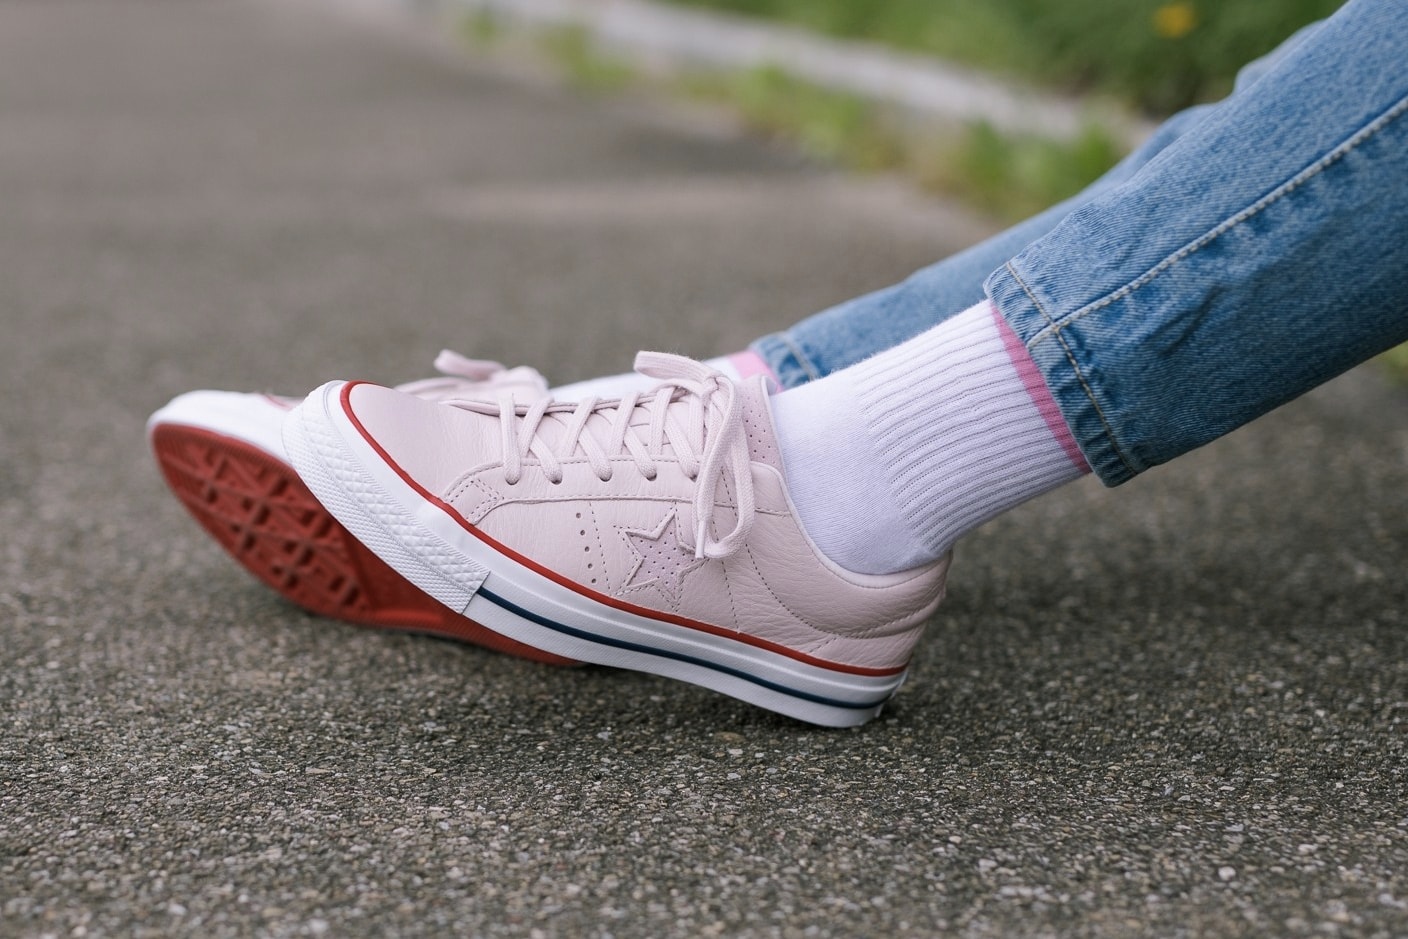 Converse One Star in Barely Rose Gym Red Pastel Pink Leather Women's Mens Unisex Sneaker Retro Where To Buy Titolo